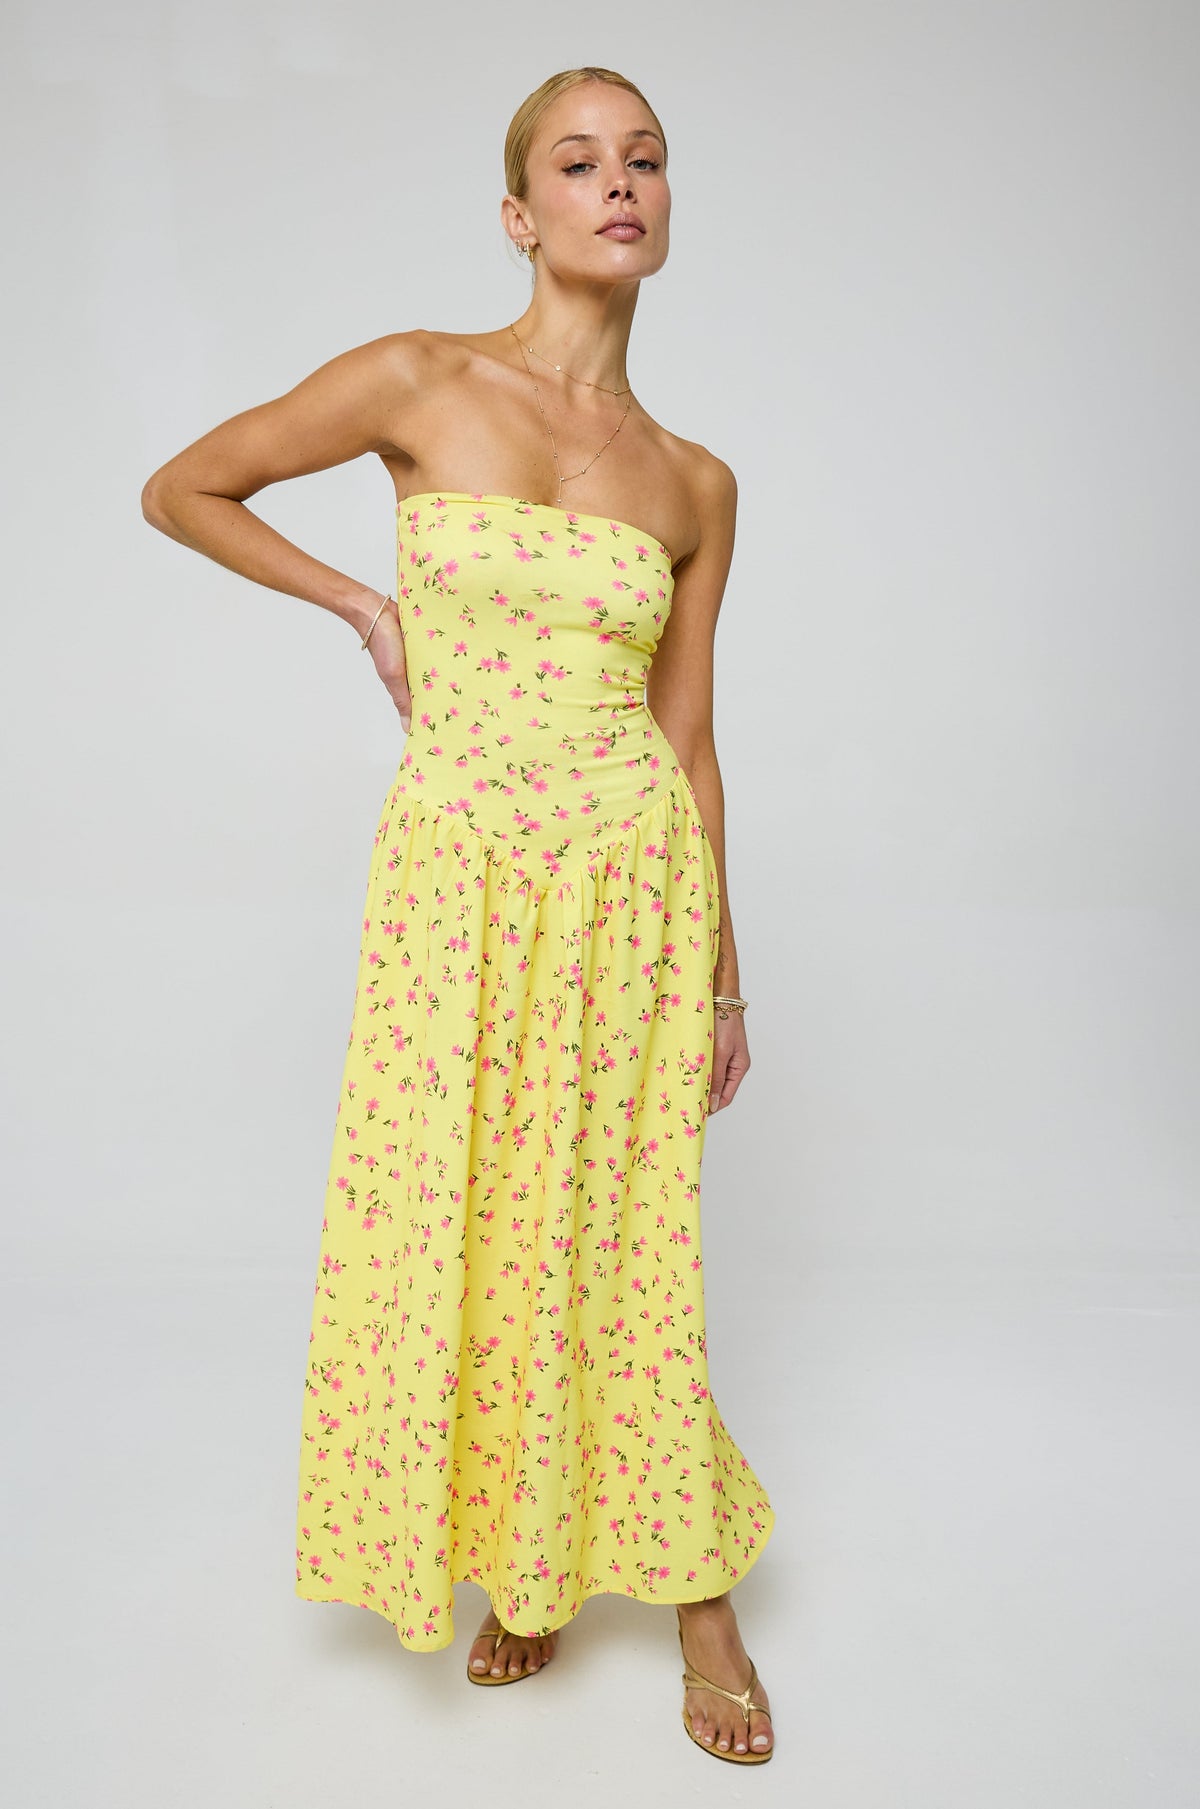 This is an image of Mackenzie Dress in Honey - RESA featuring a model wearing the dress